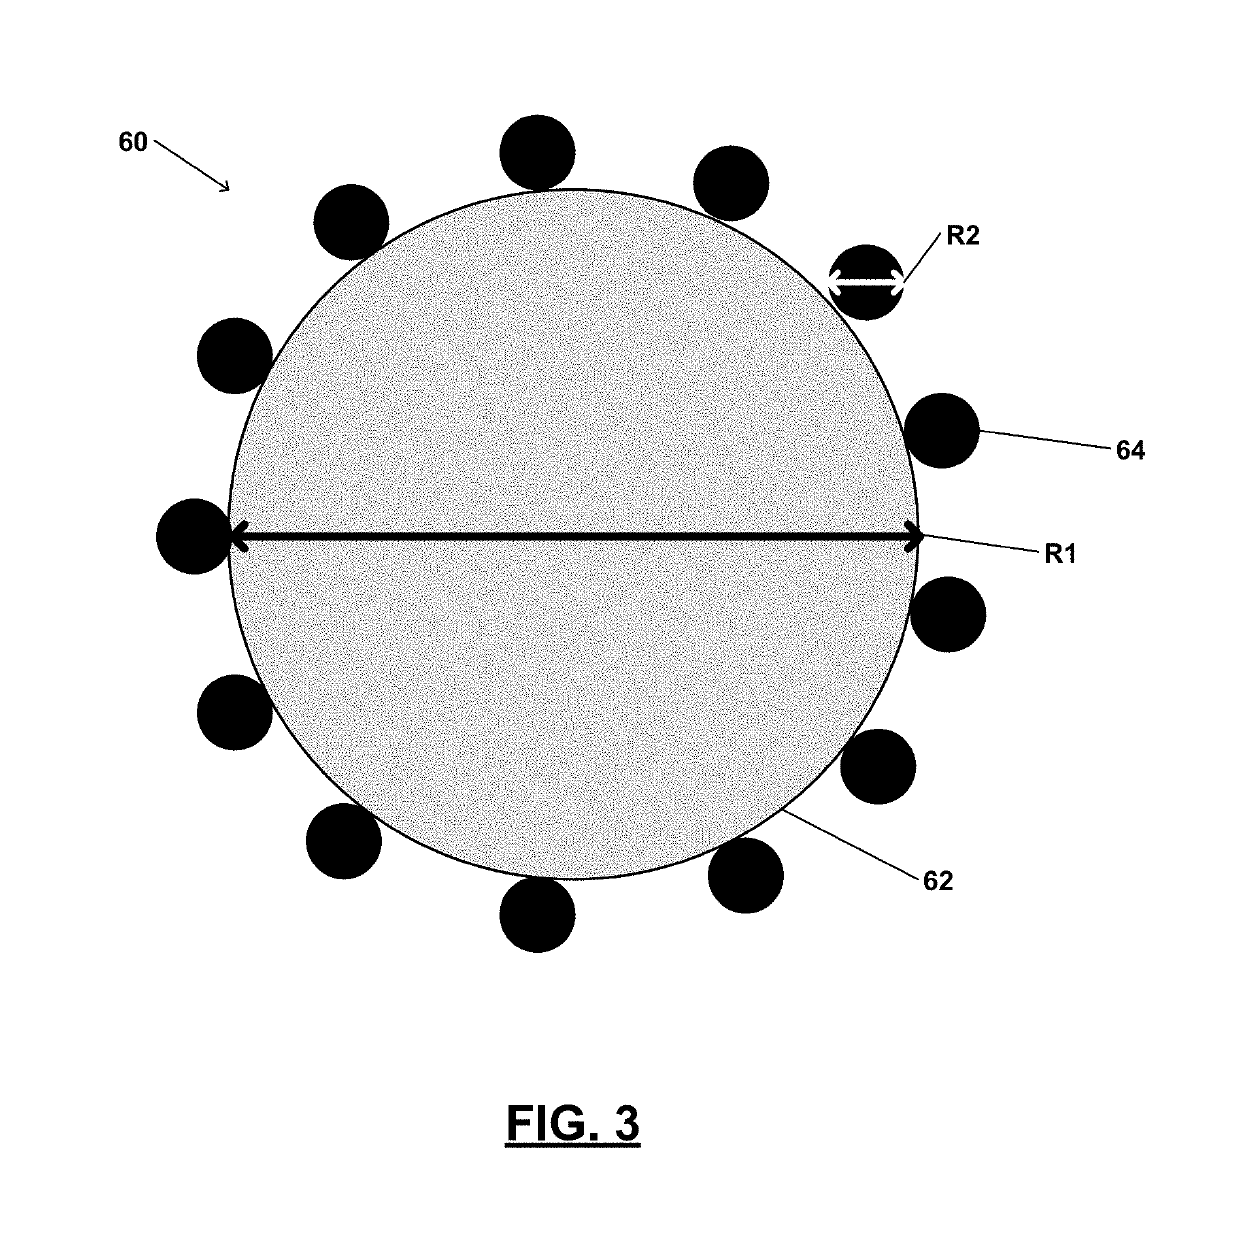 Methods of making electroactive composite materials for an electrochemical cell